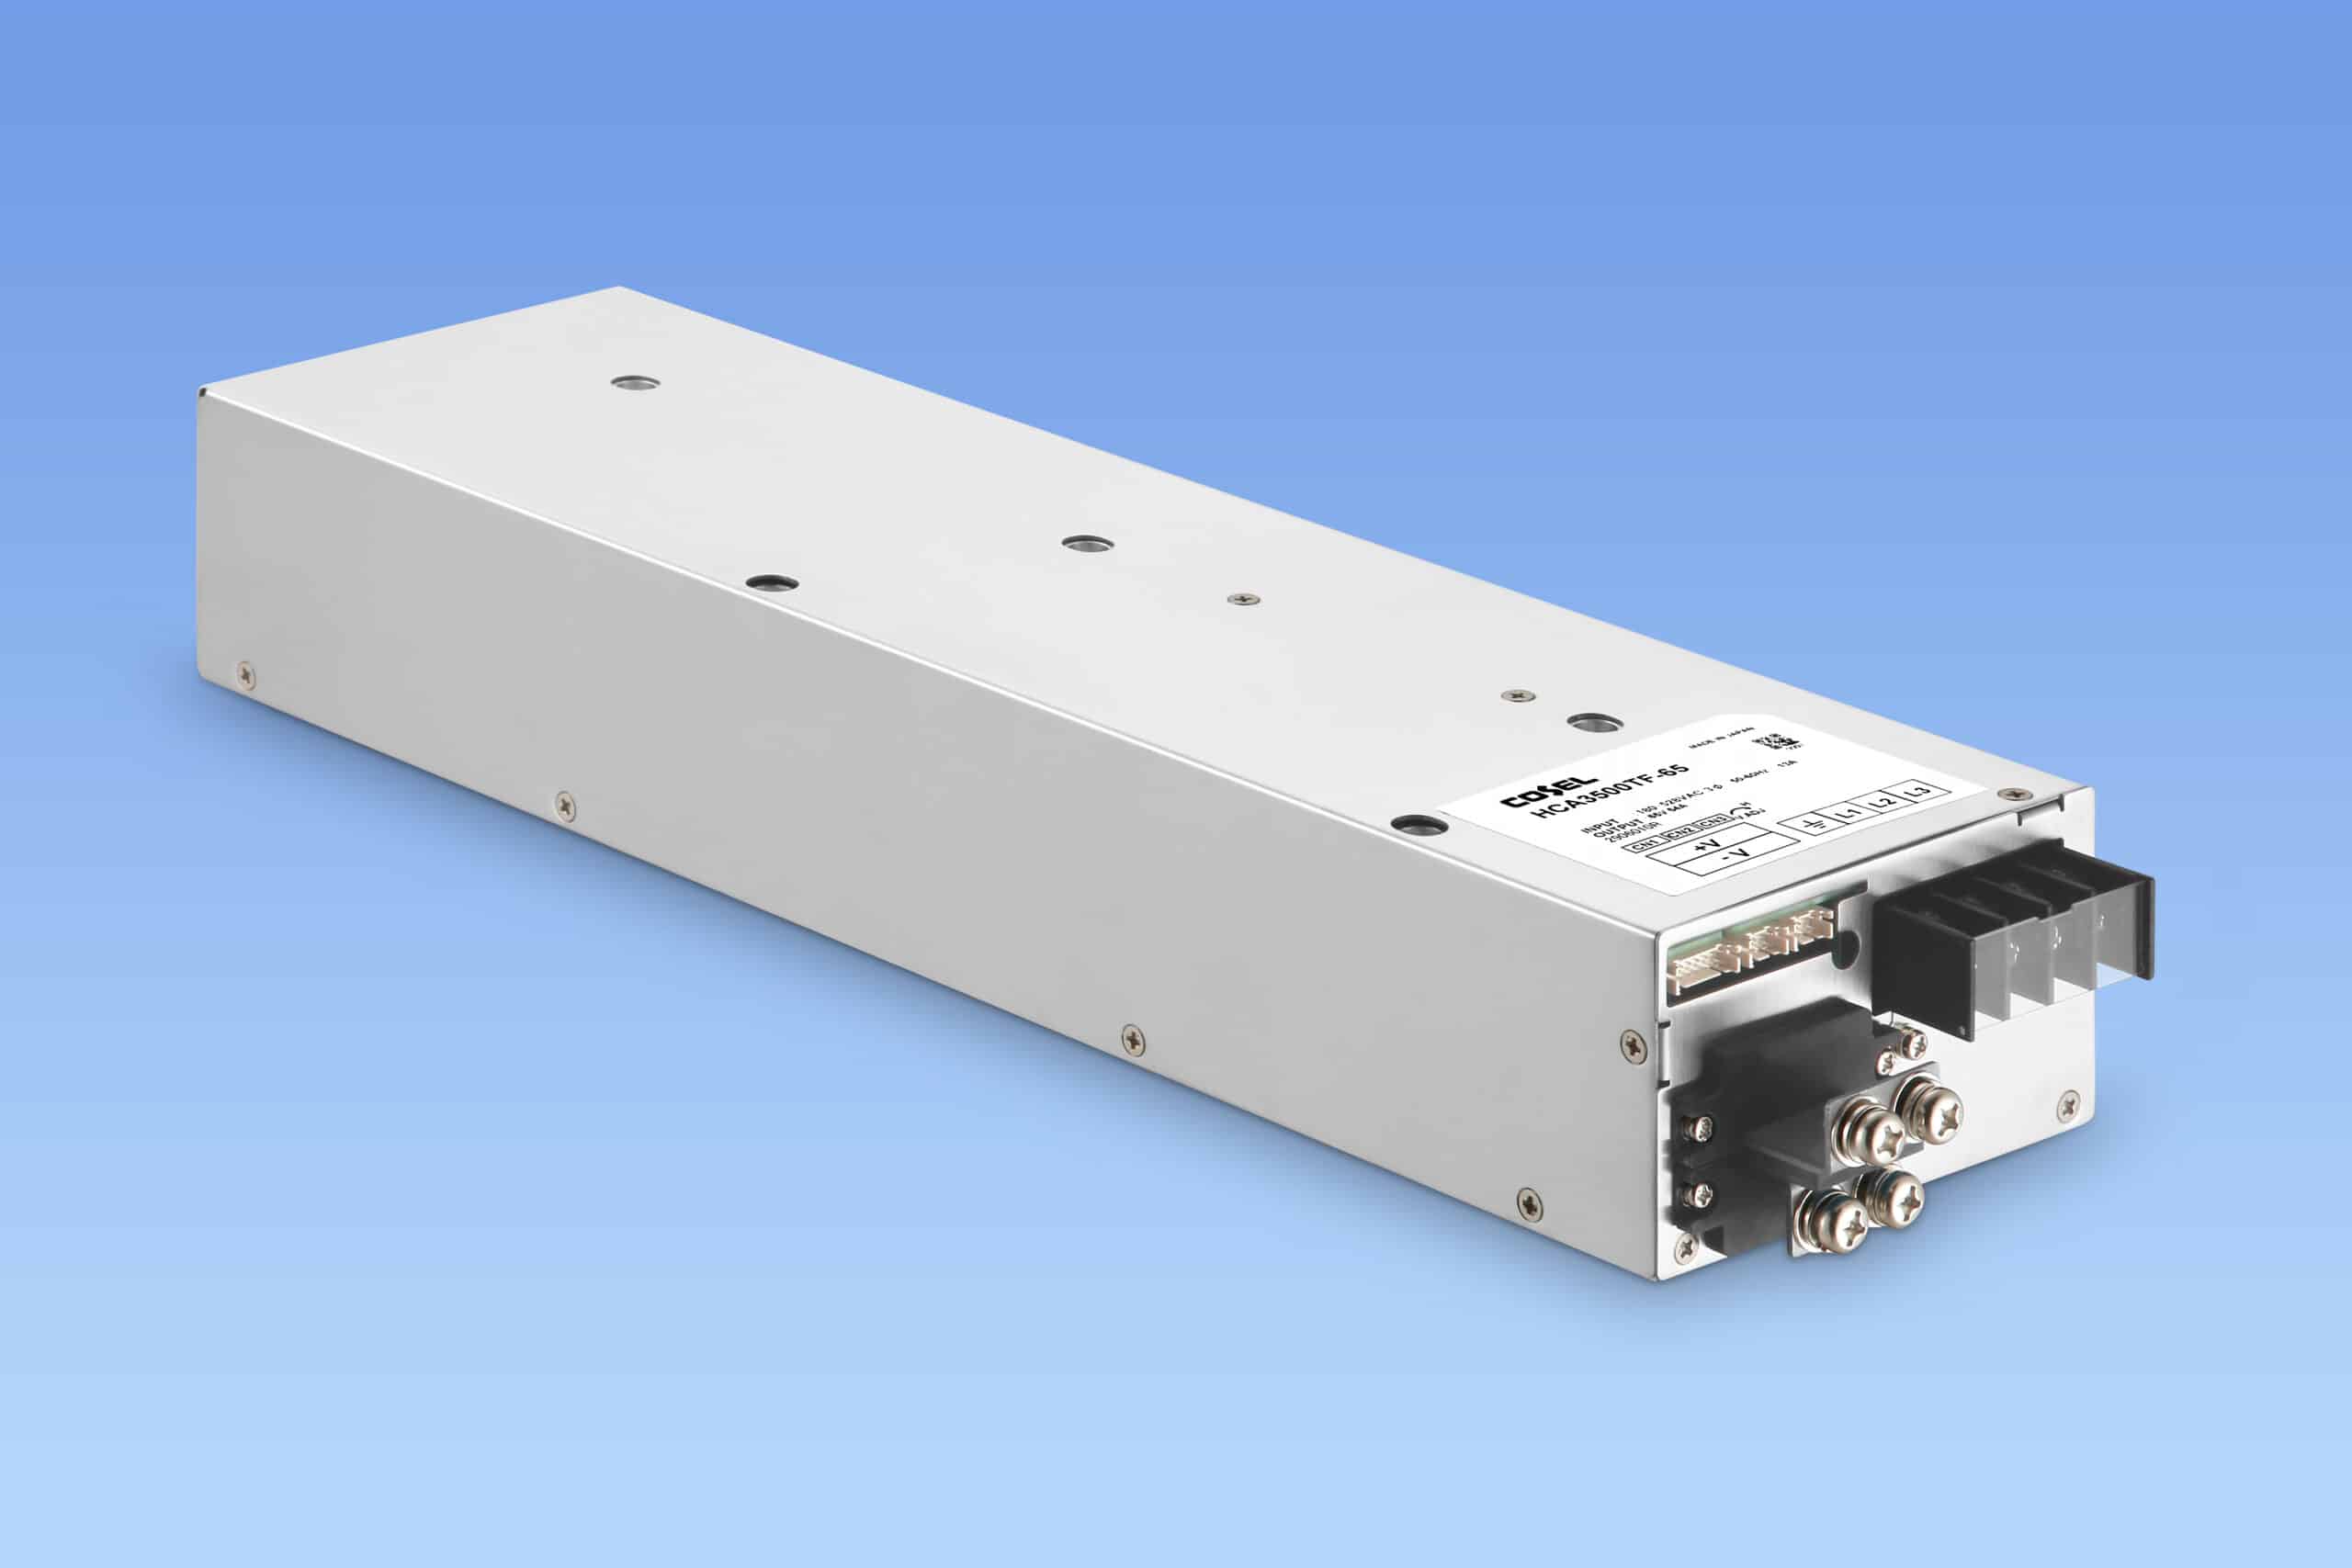 A 3.5kW AC/DC Power Supply For Industrial Applications